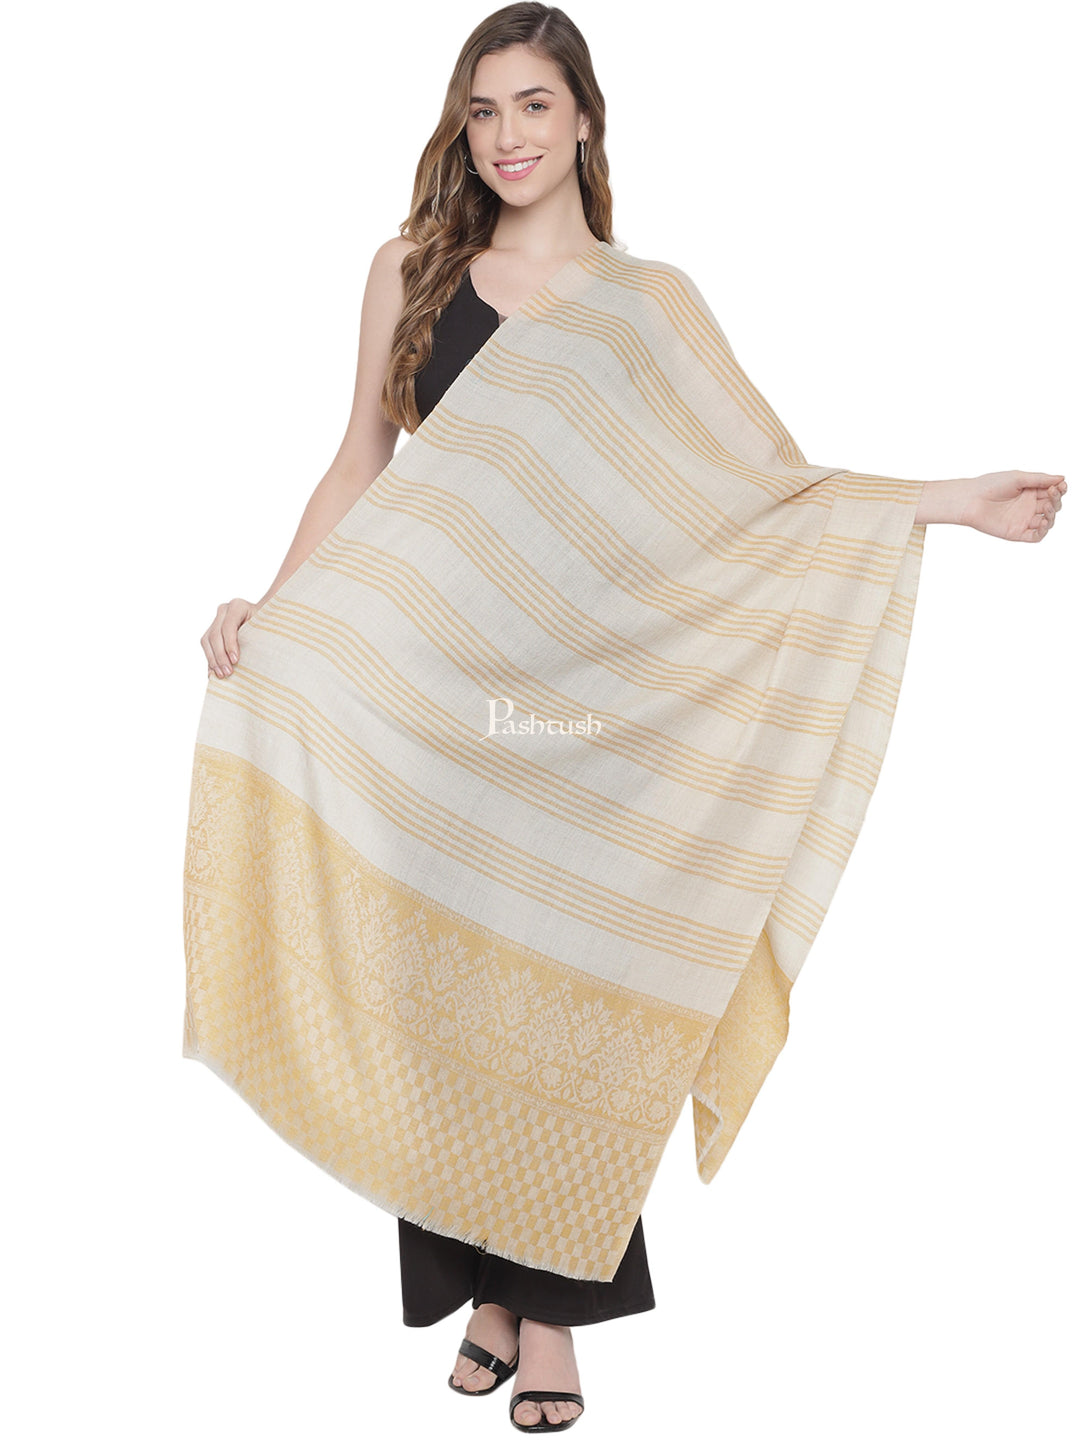 Pashtush India Womens Stoles and Scarves Scarf Pashtush Womens Extra Fine Wool Stole, Striped Weave, Sunflower,Yellow